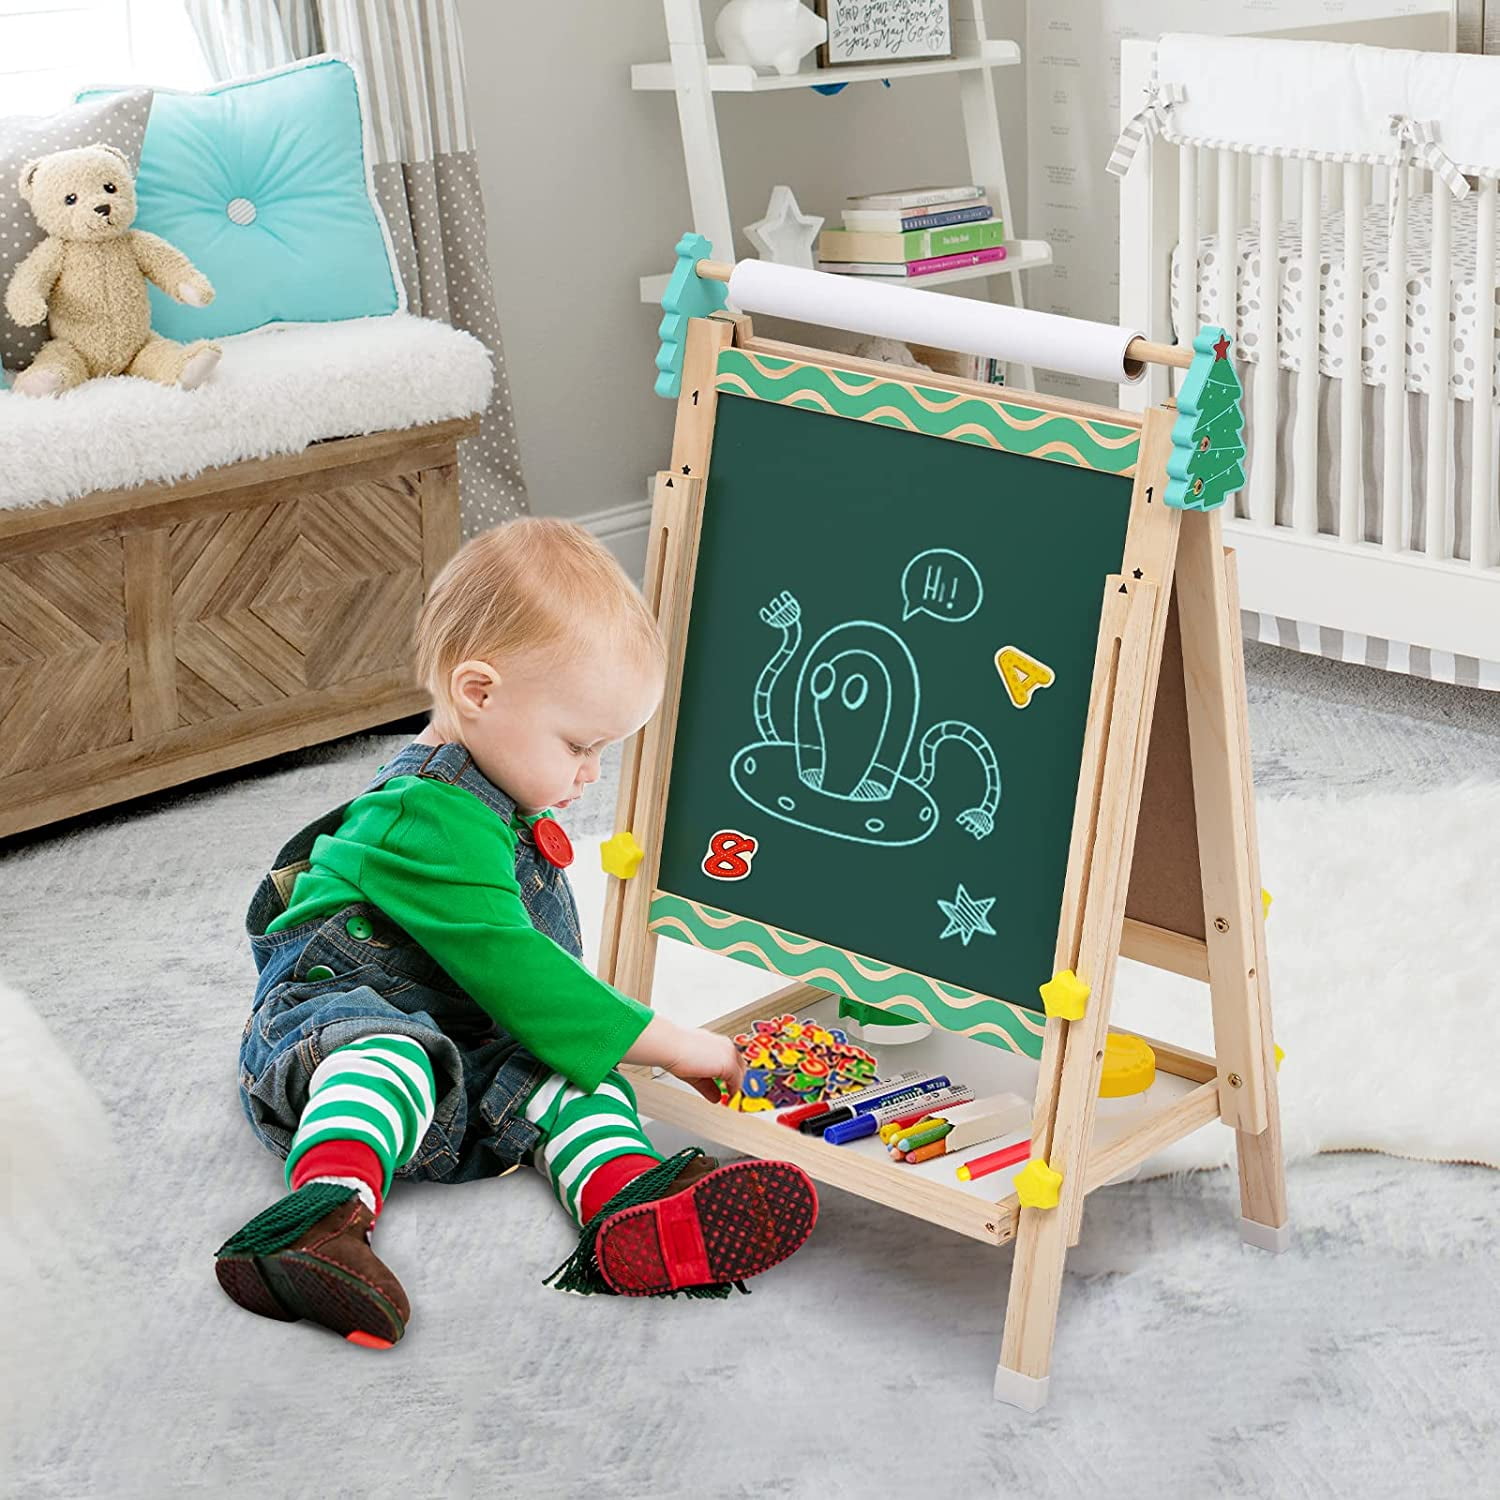 Dripex Art Easel for Kids - Double Sided Toddler Wooden Easel with Dry  Erase Board&Chalkboard, Paper Roll, Letters&Numbers - Adjustable Children  Painting Easel …